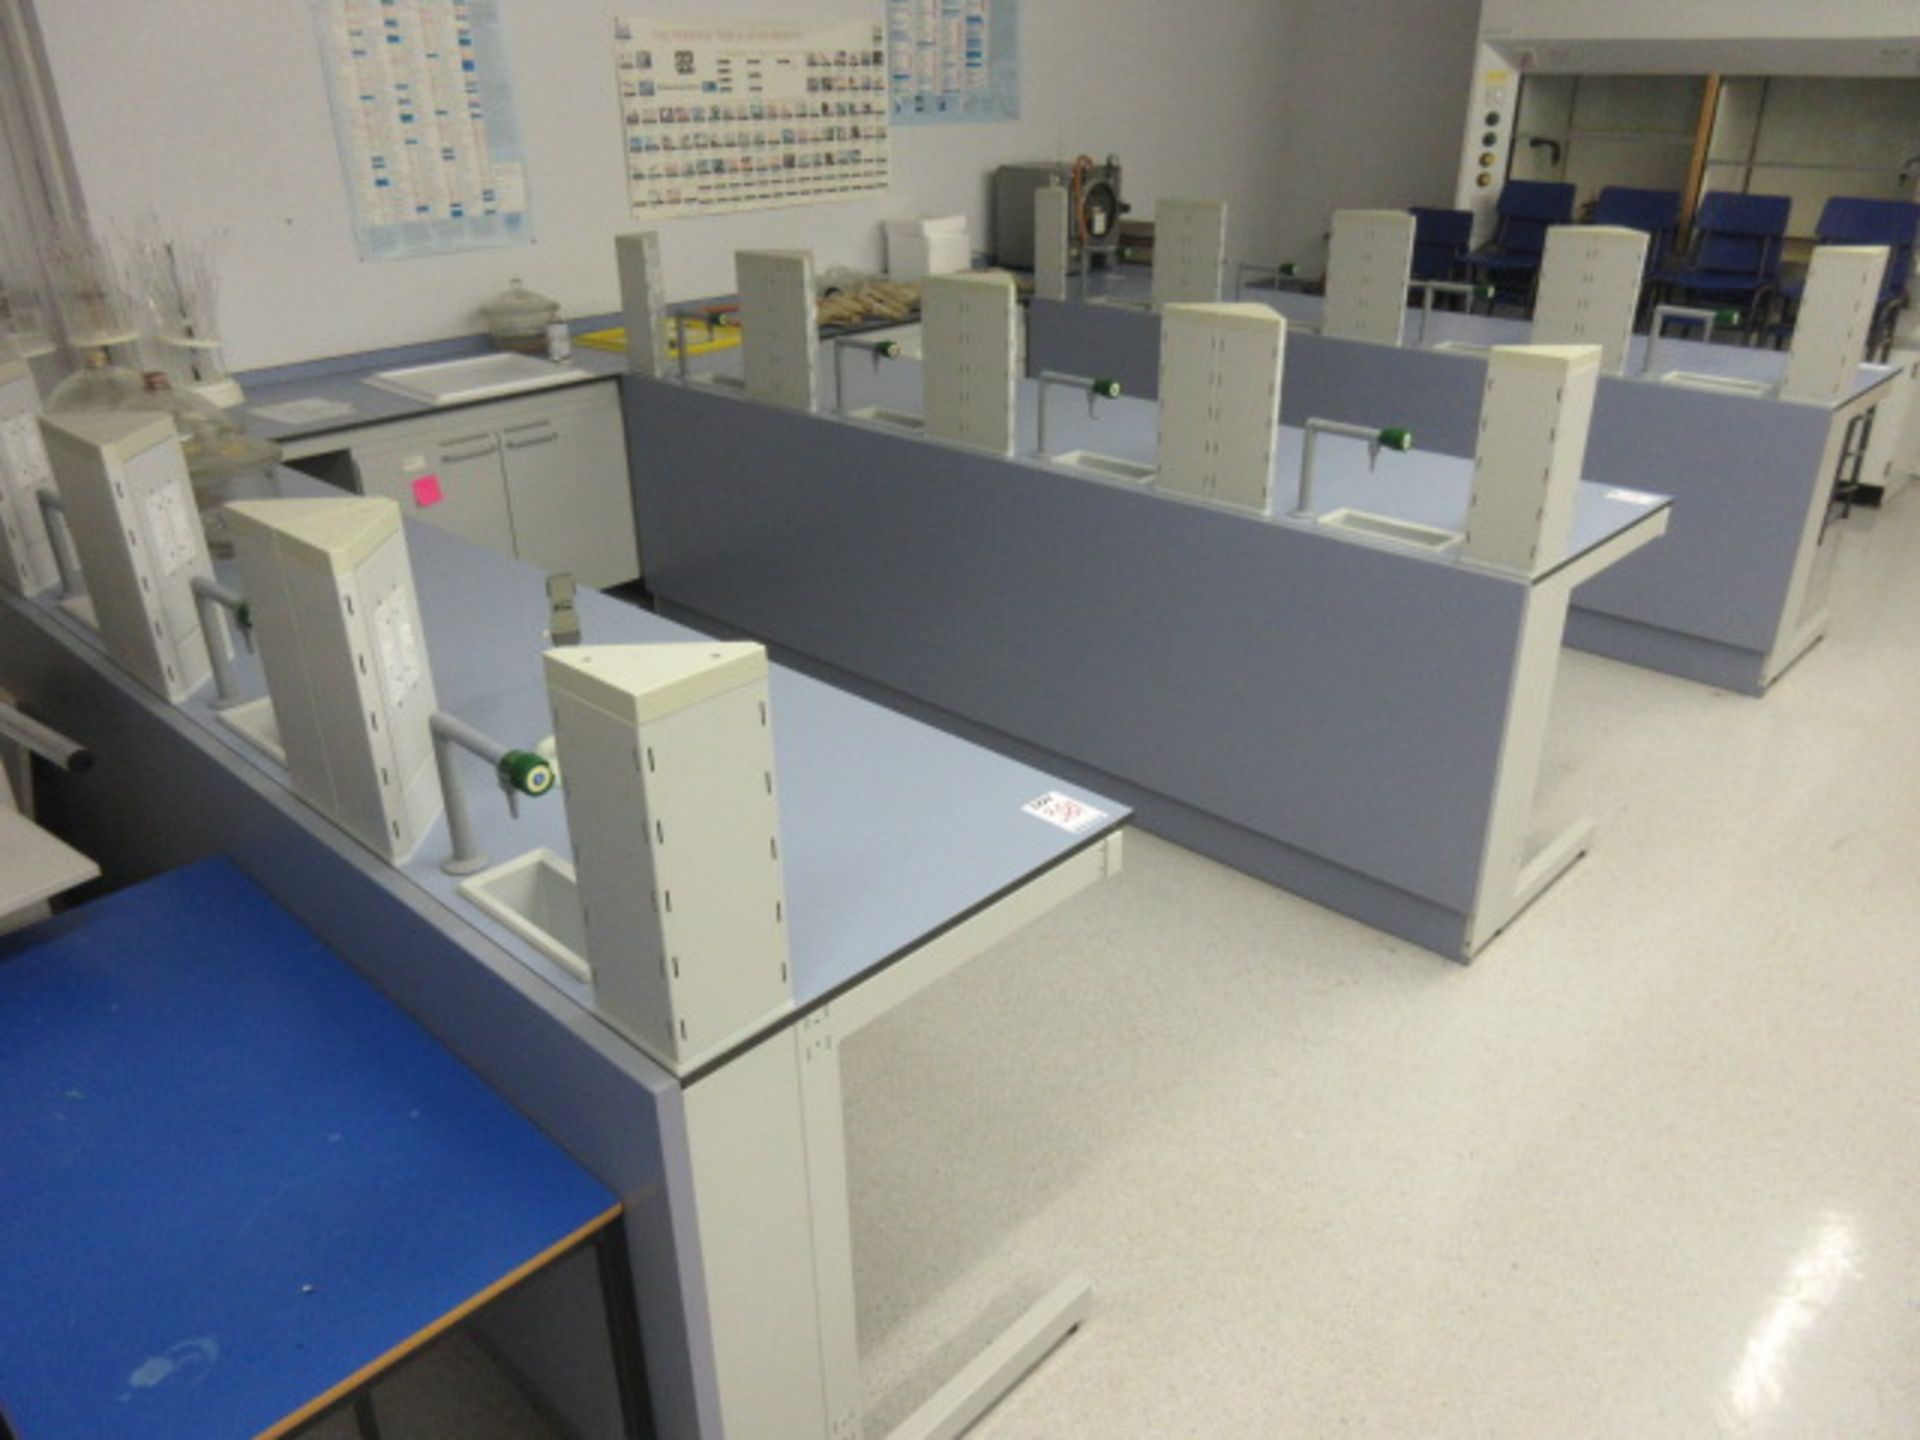 KOTTERMANN LABORATORY WORK STATION BENCHES. THREE RUN OF 4 WORK STATIONS WITH END BENCH THAT - Image 2 of 3